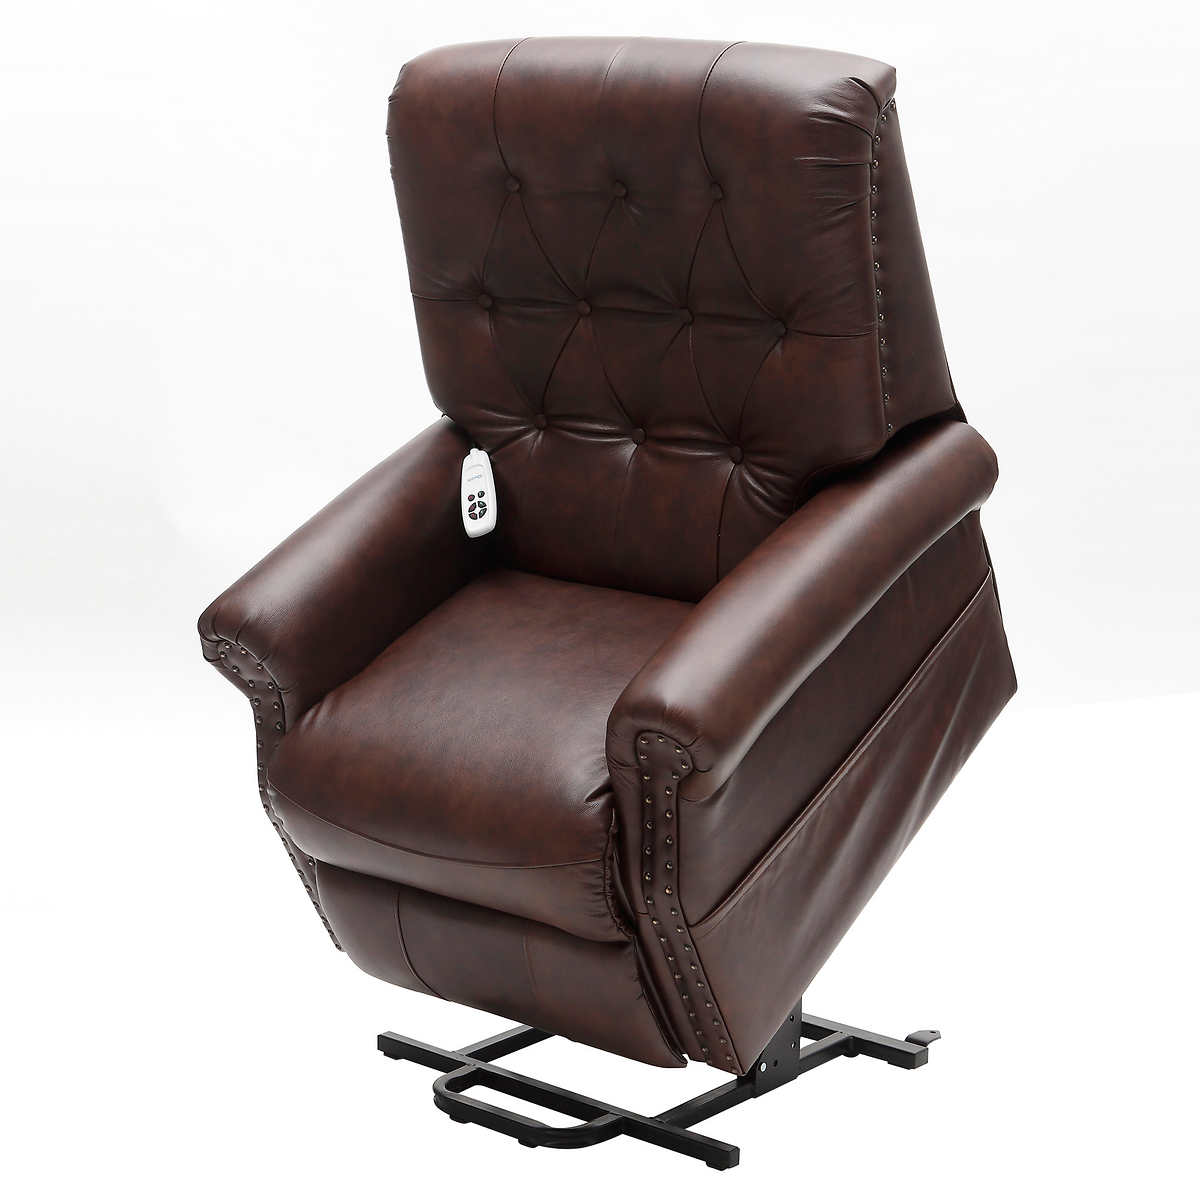 Recliners | Costco - EZee Life Neptune Brown Top Grain Leather Lift Chair